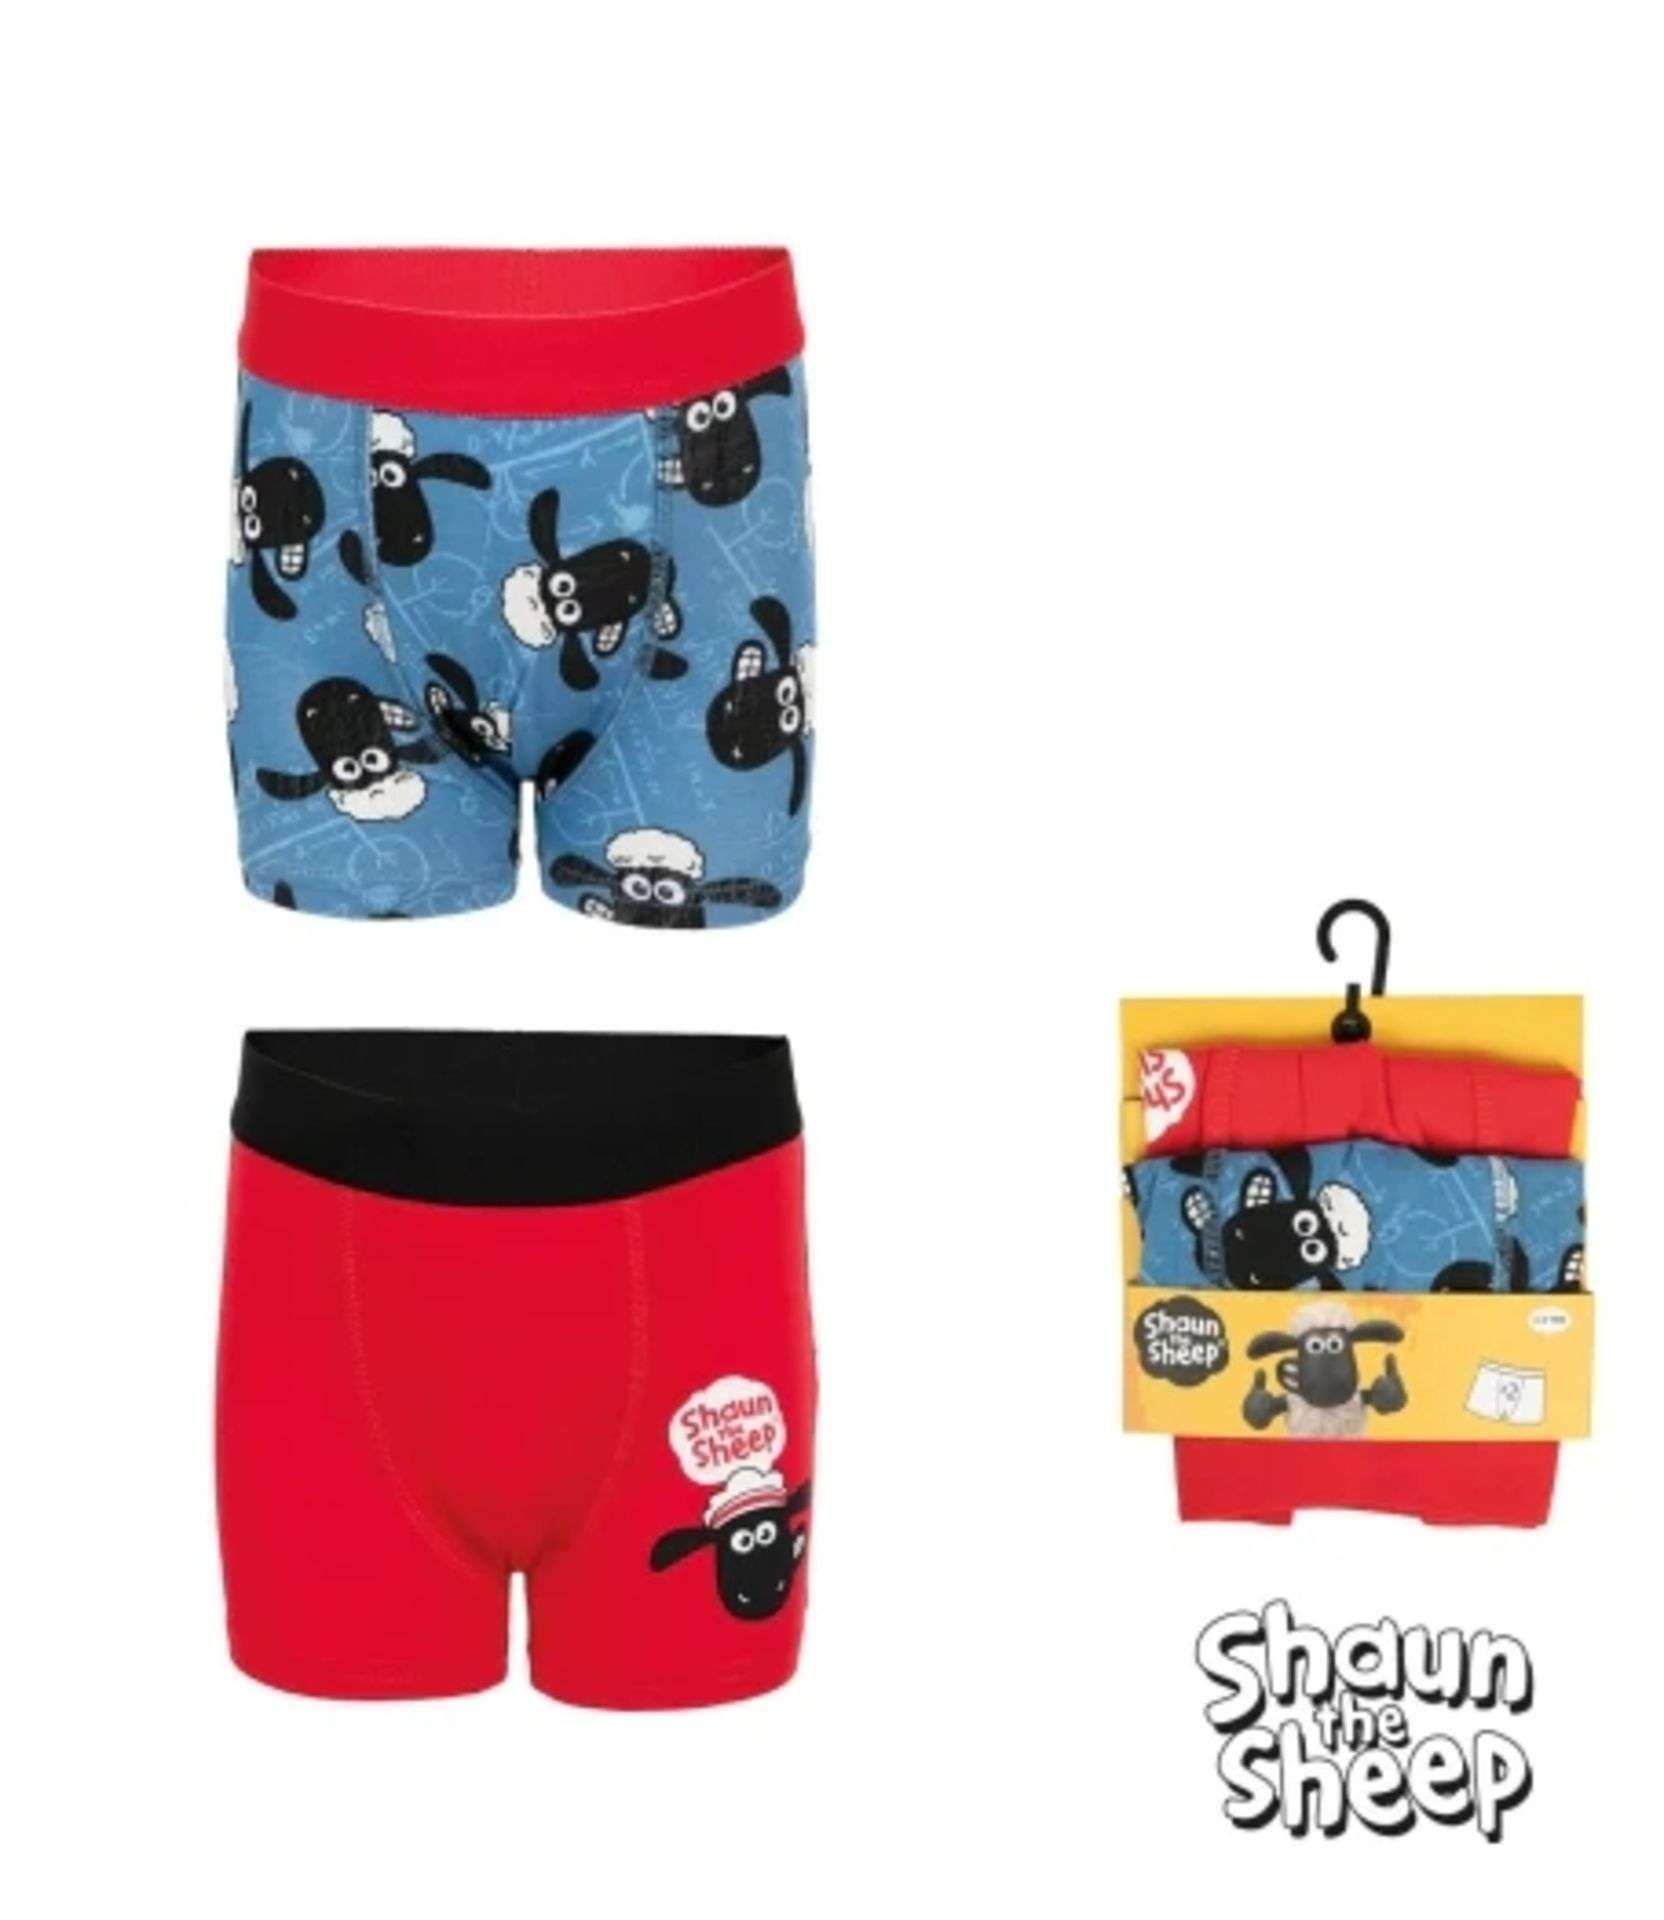 8 X BRAND NEW SHAUN THE SHEEP SETS OF 2 ASSORTED BOXERS (SIZES MAY VARY) DB